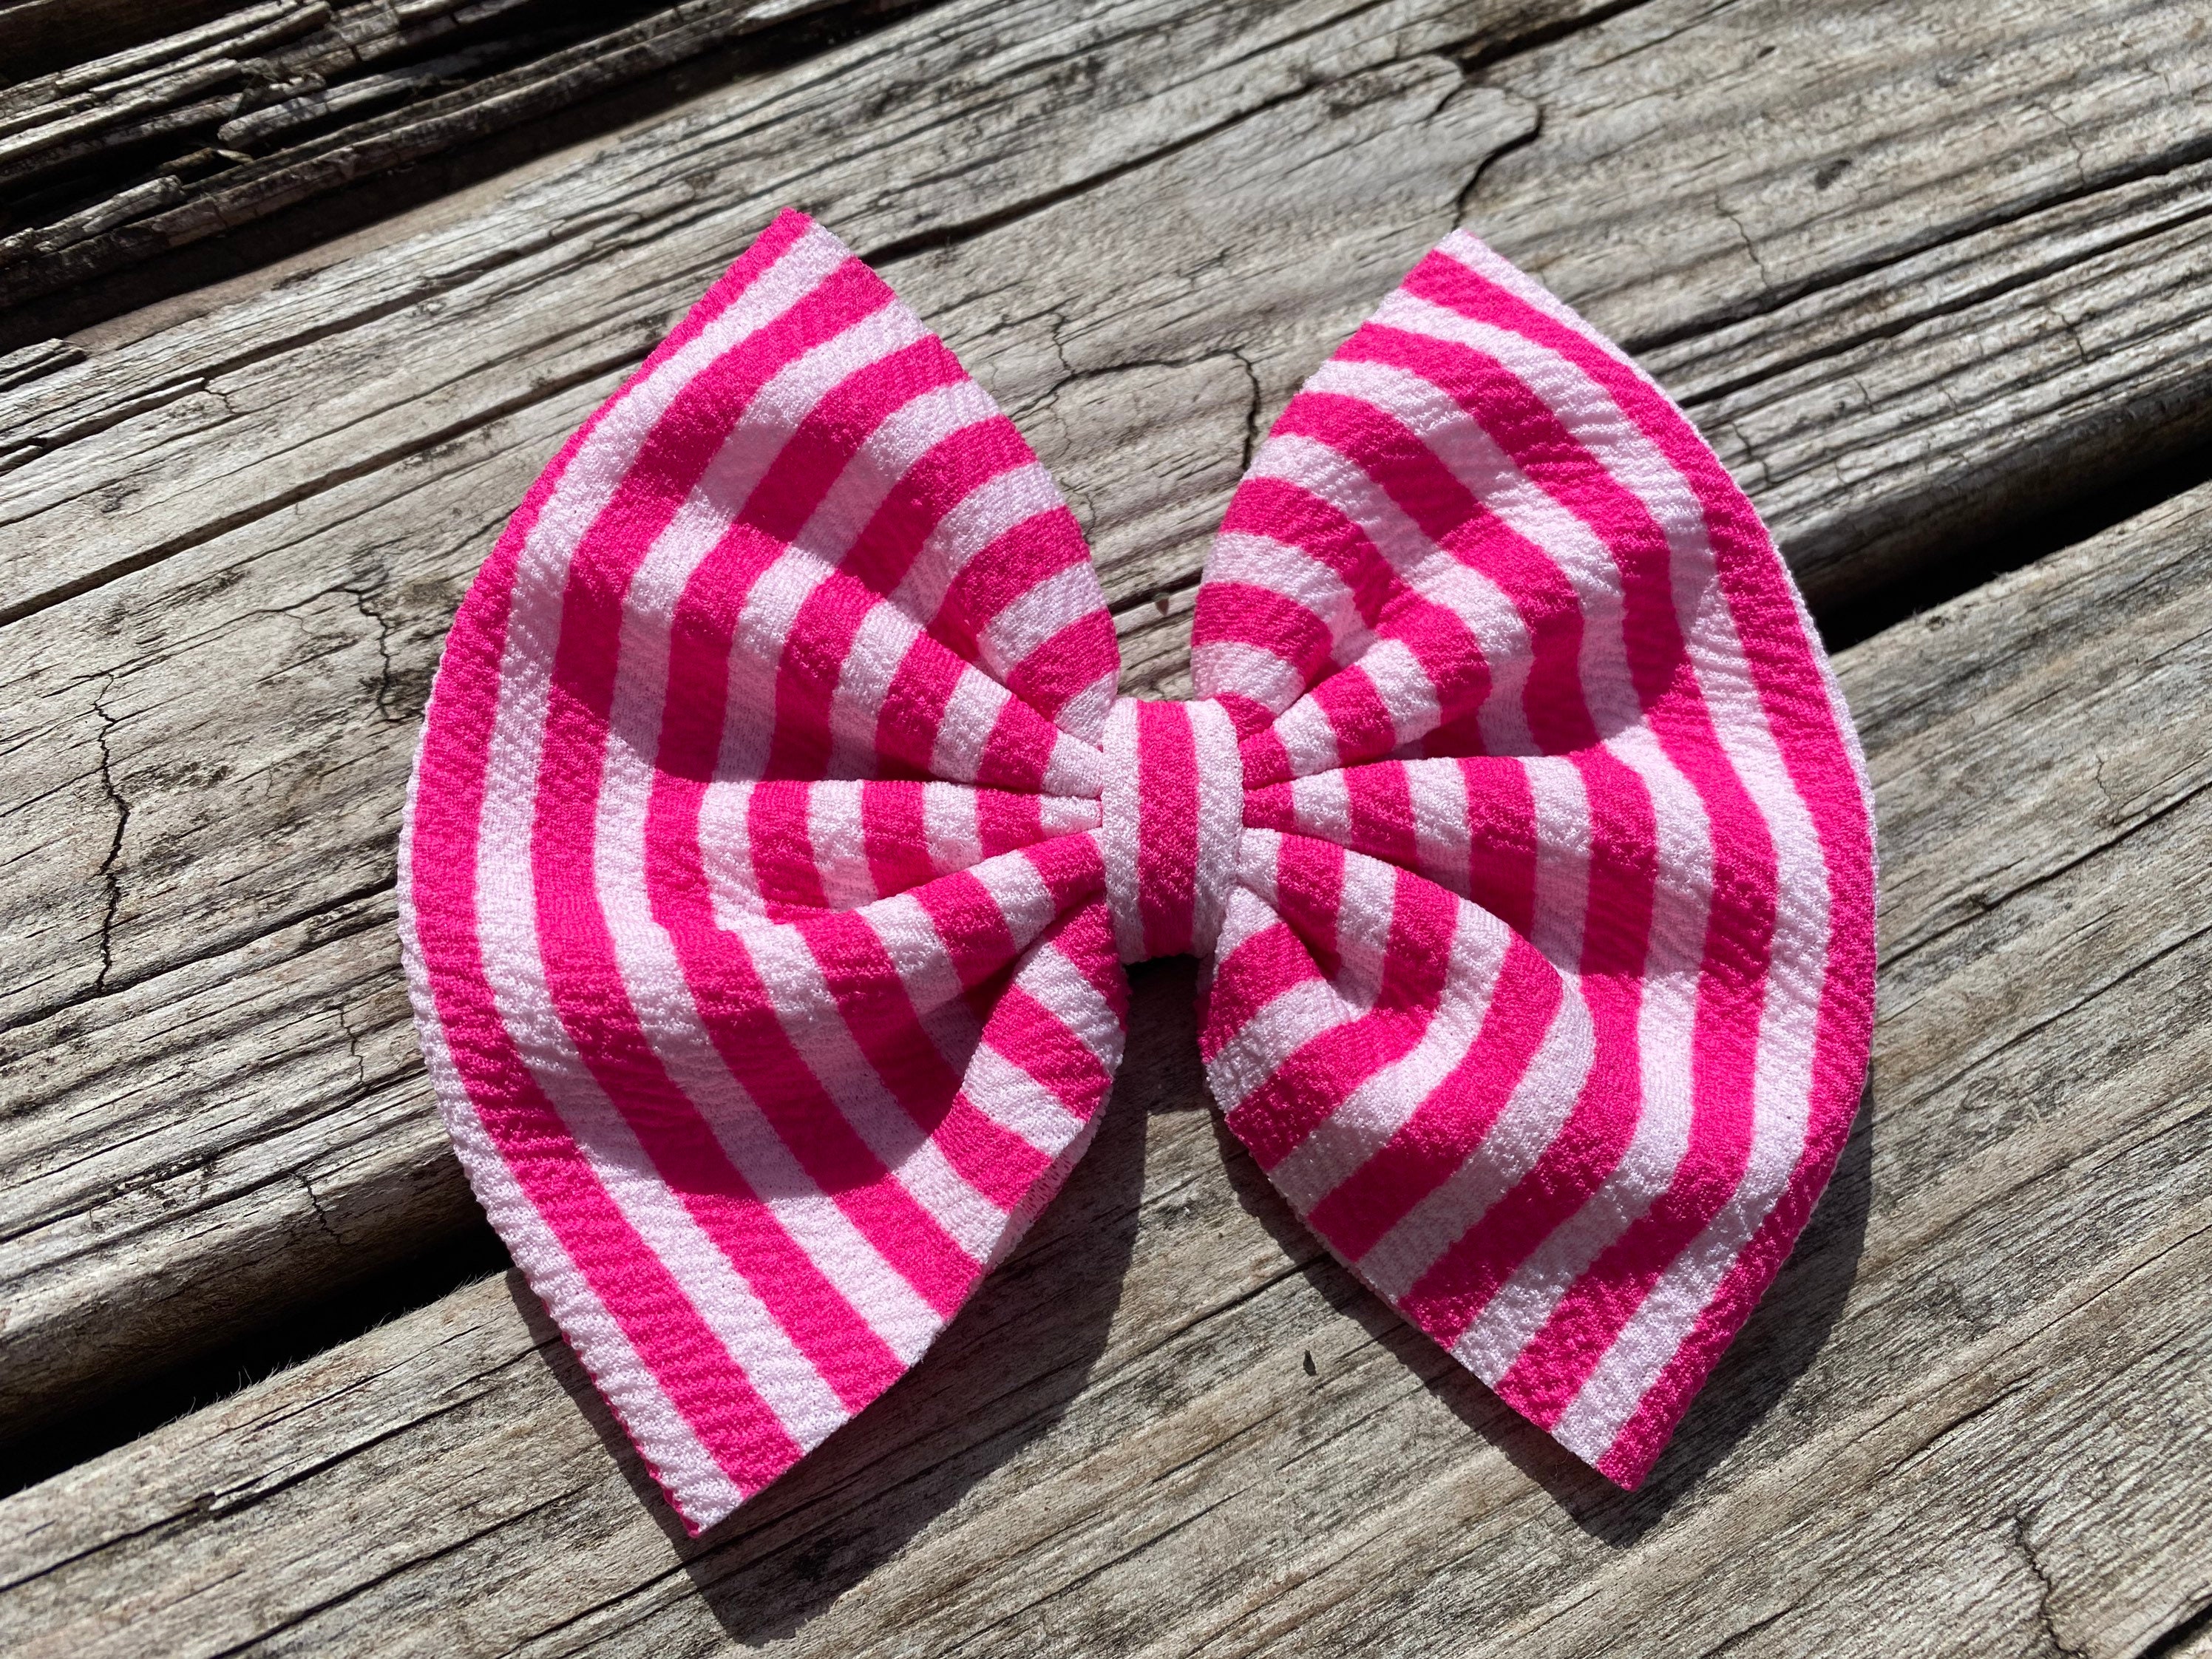 Pink and White Ribbon Collection Wide Striped Headband - Bows Etc.